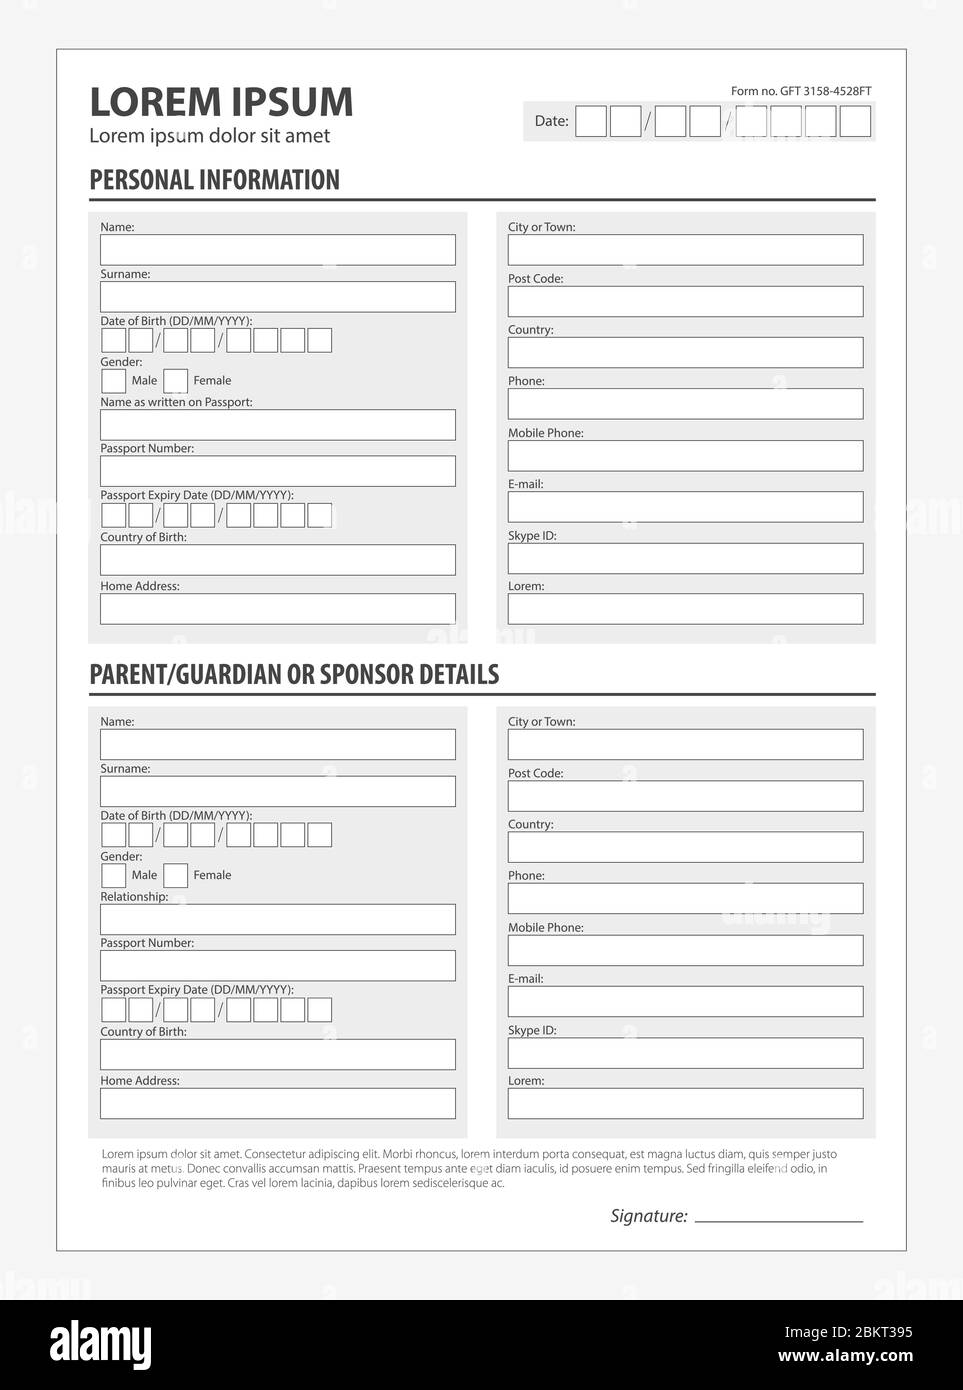 Standard clean application form. Document concept for admission of a foreigner traveling Stock Vector